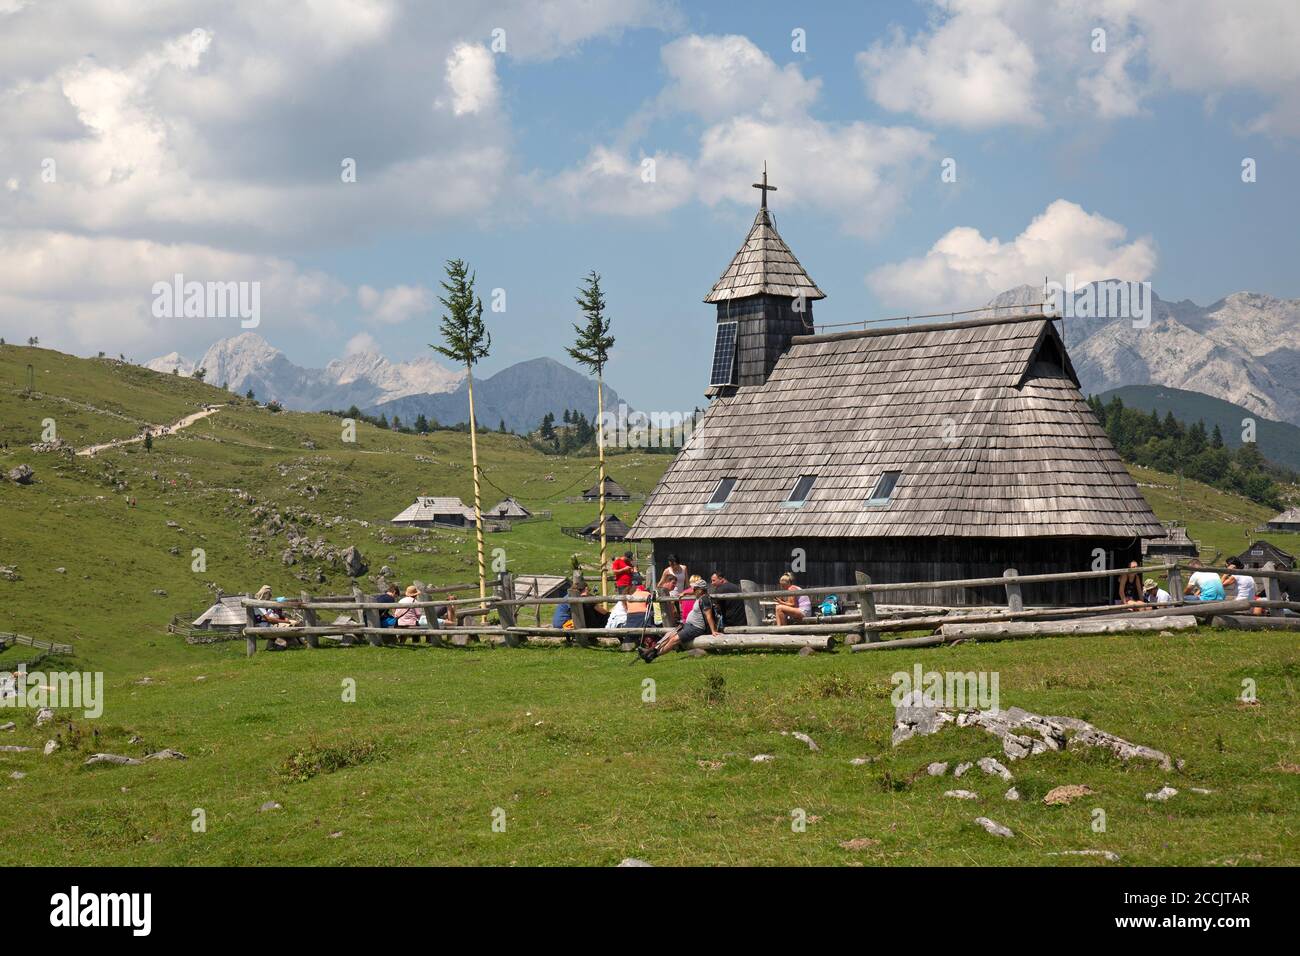 The mountain settlement village of Velika Planina in Slovenia. The village church in the foreground. Stock Photo